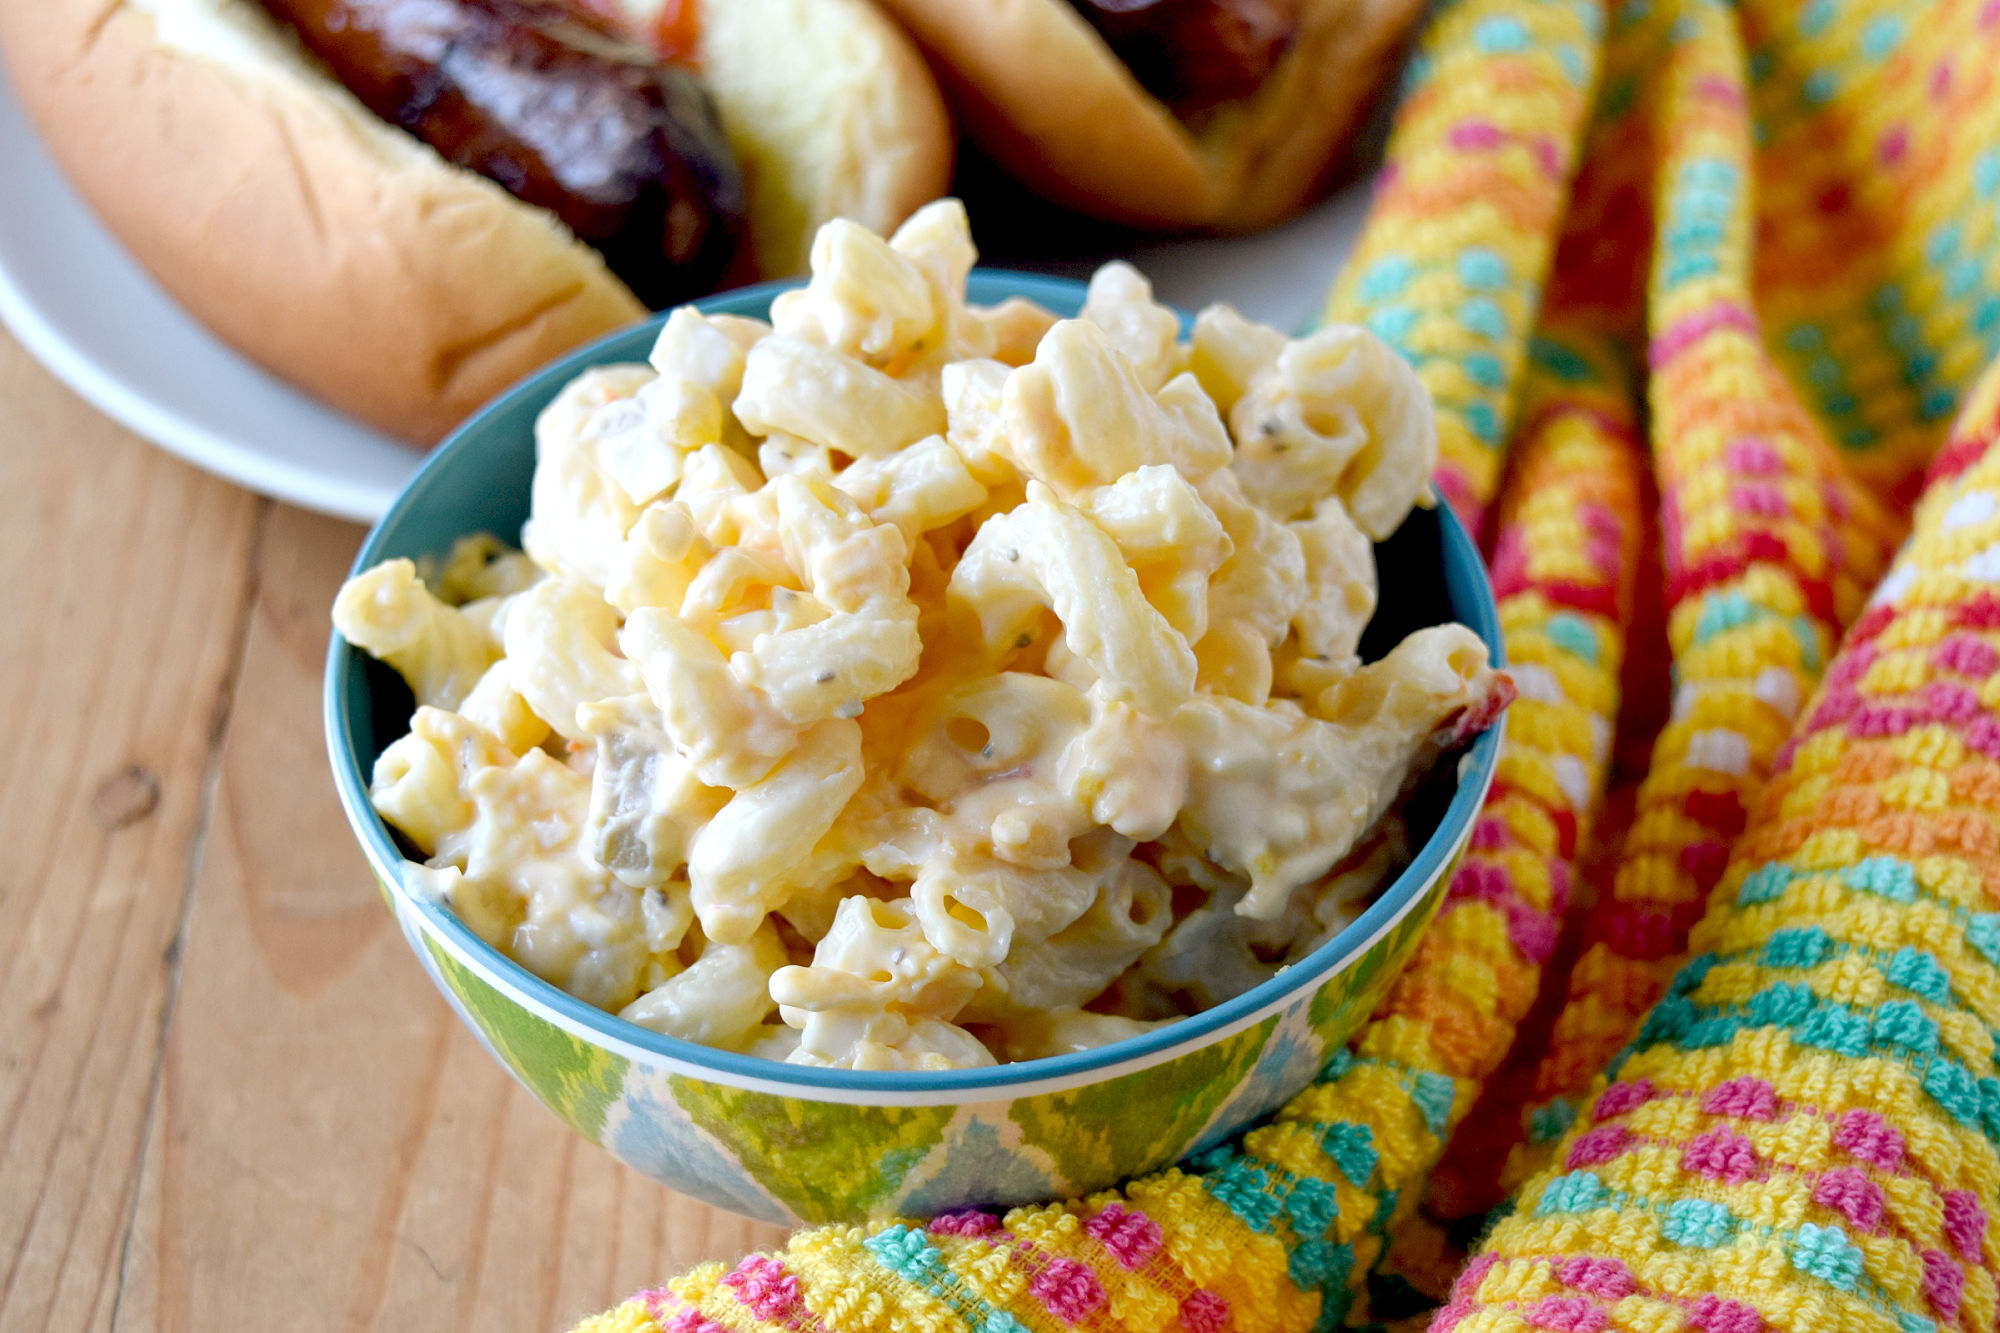 Pimento Cheese Macaroni Salad is a combination of a southern style macaroni salad with egg and pimento cheese spread. The two flavors together are deliciously creamy and cheesy. #OurFamilyTale #pimentocheese #macaronisalad #pimentosalad #sourthernfood #comfortfood